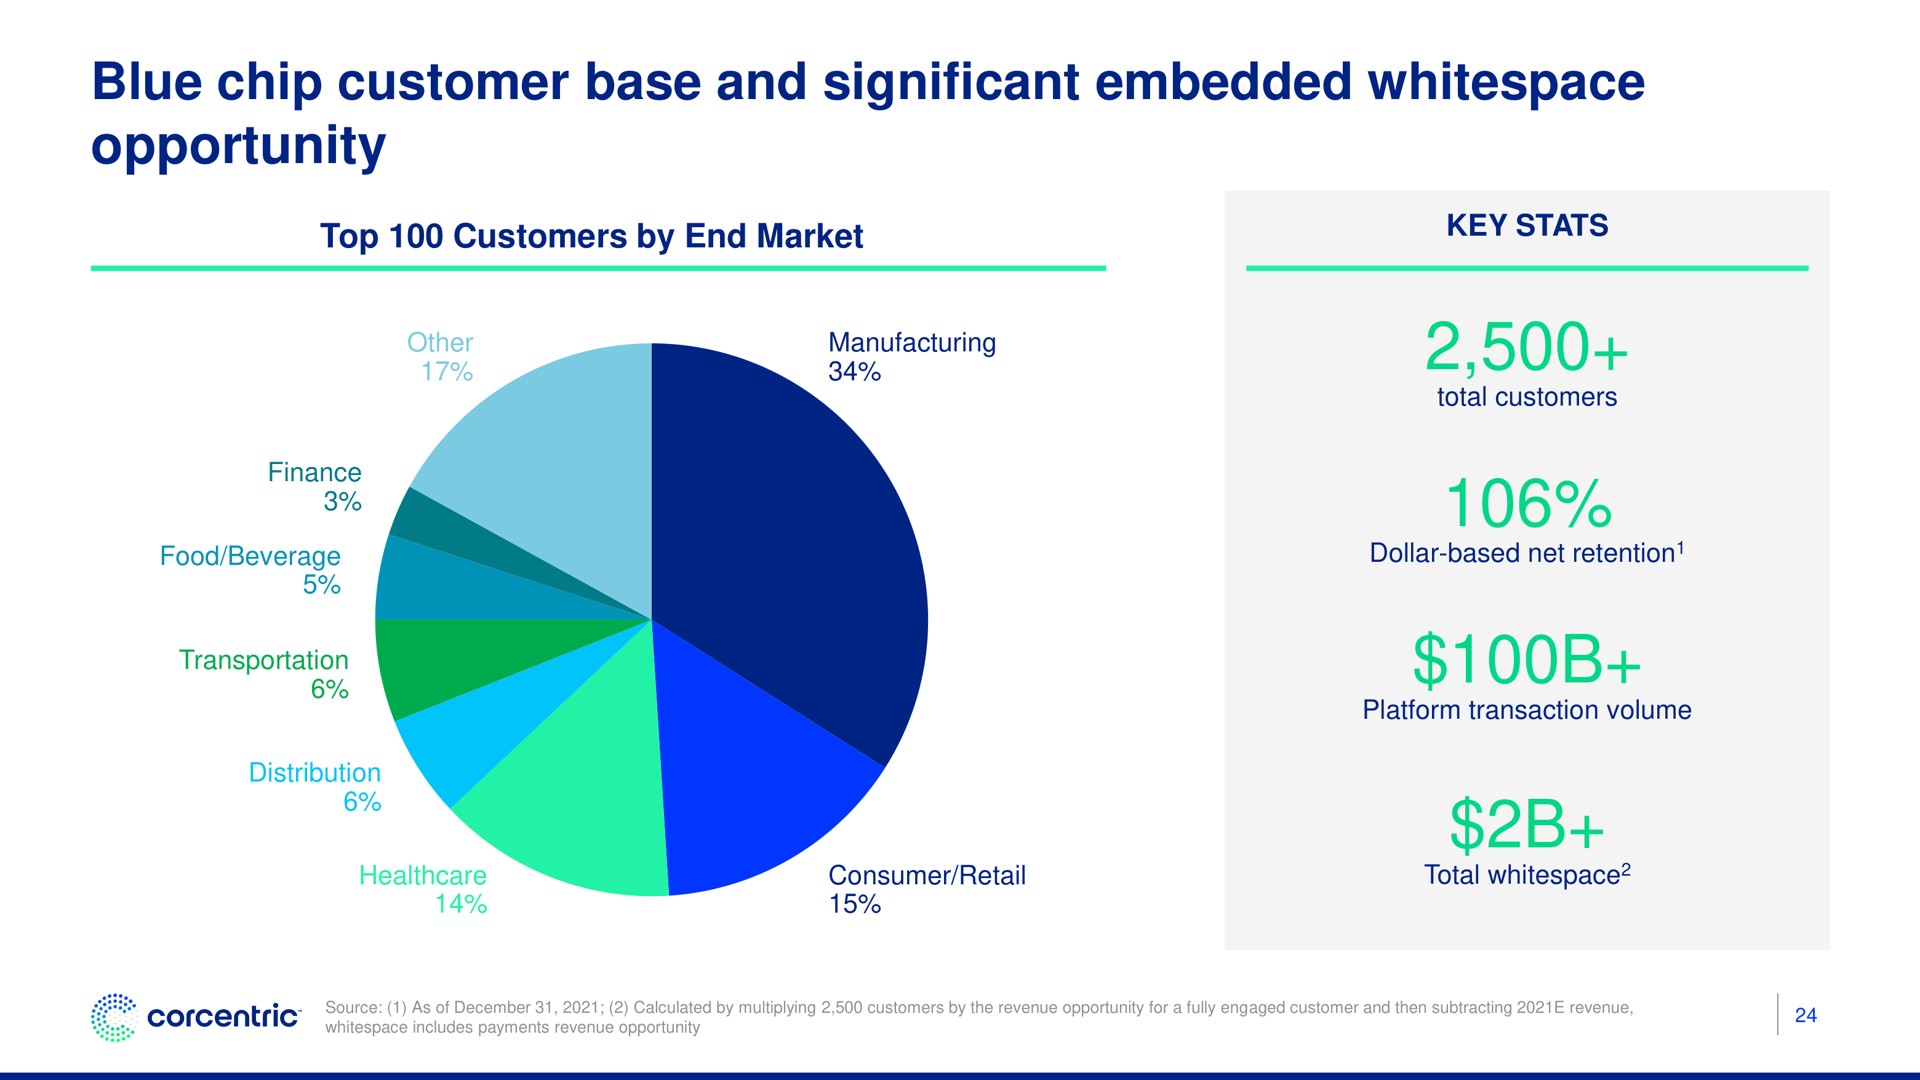 blue chip customer base and significant embedded opportunity | Corecentric